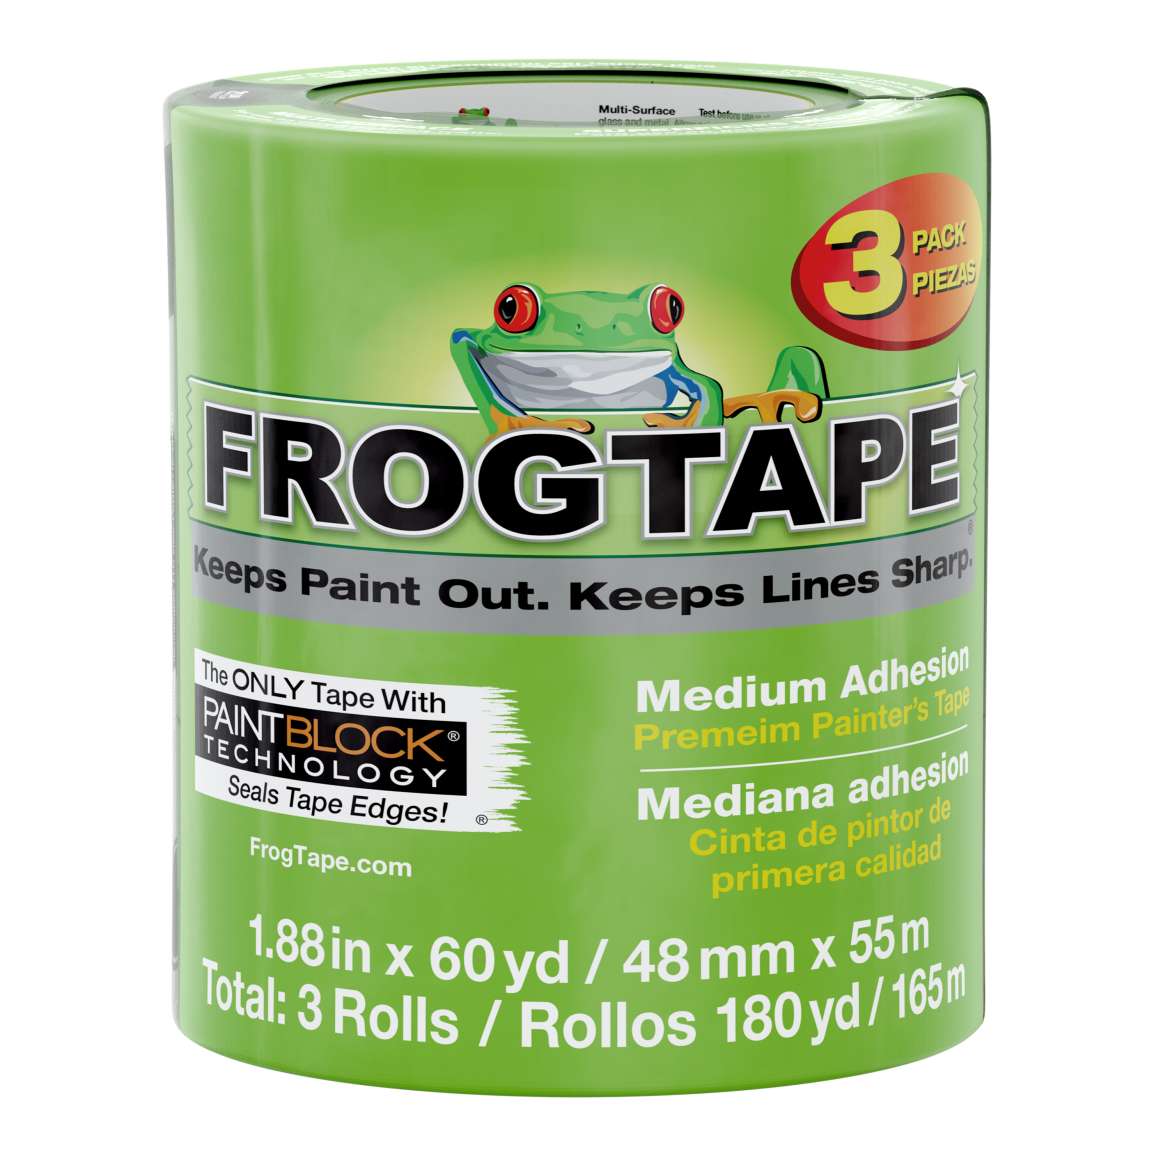 FrogTape® Multi-Surface Painter's Tape - Green, 3 pk, 1.88 in. x 60 yd.